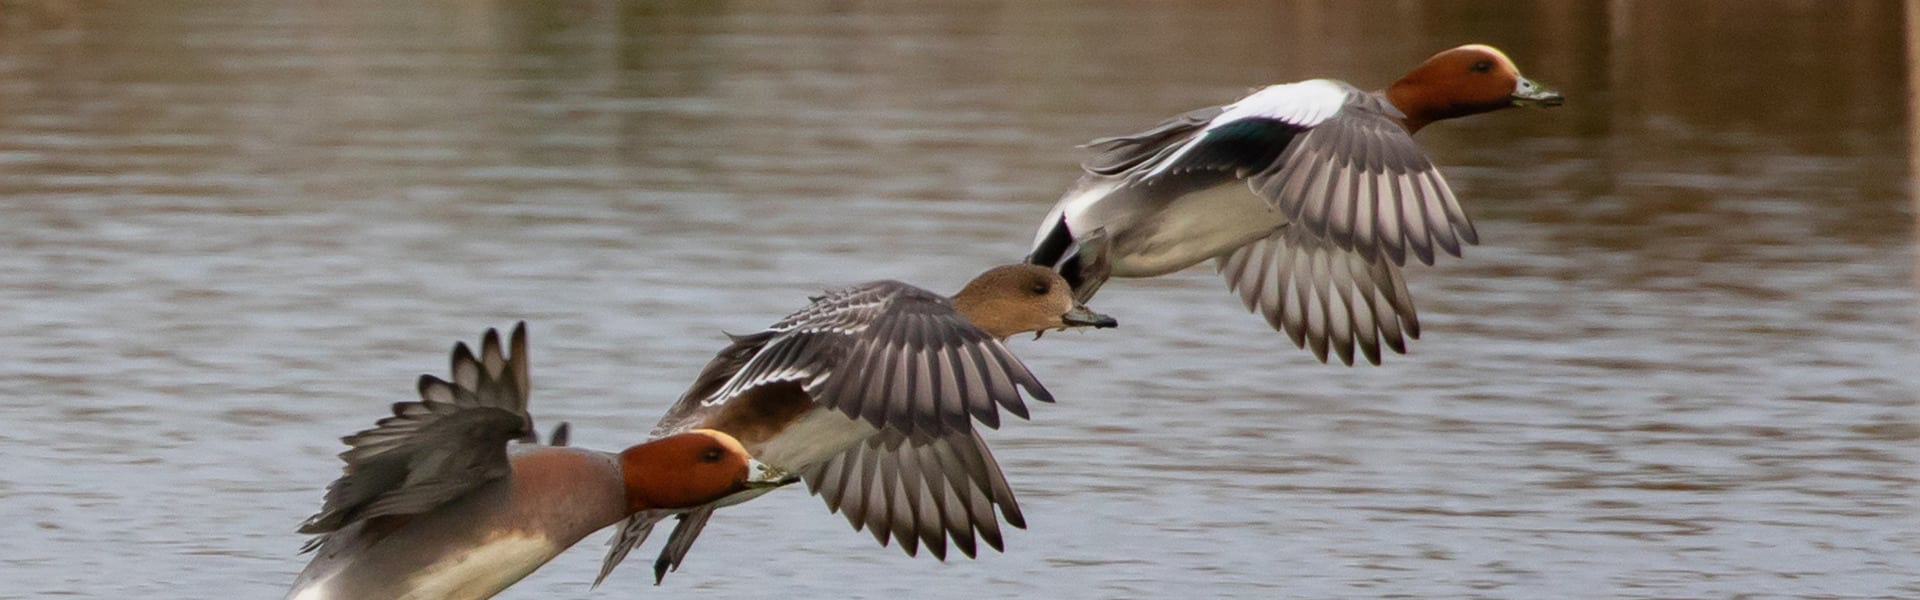 Three wigeons taking flight out of water